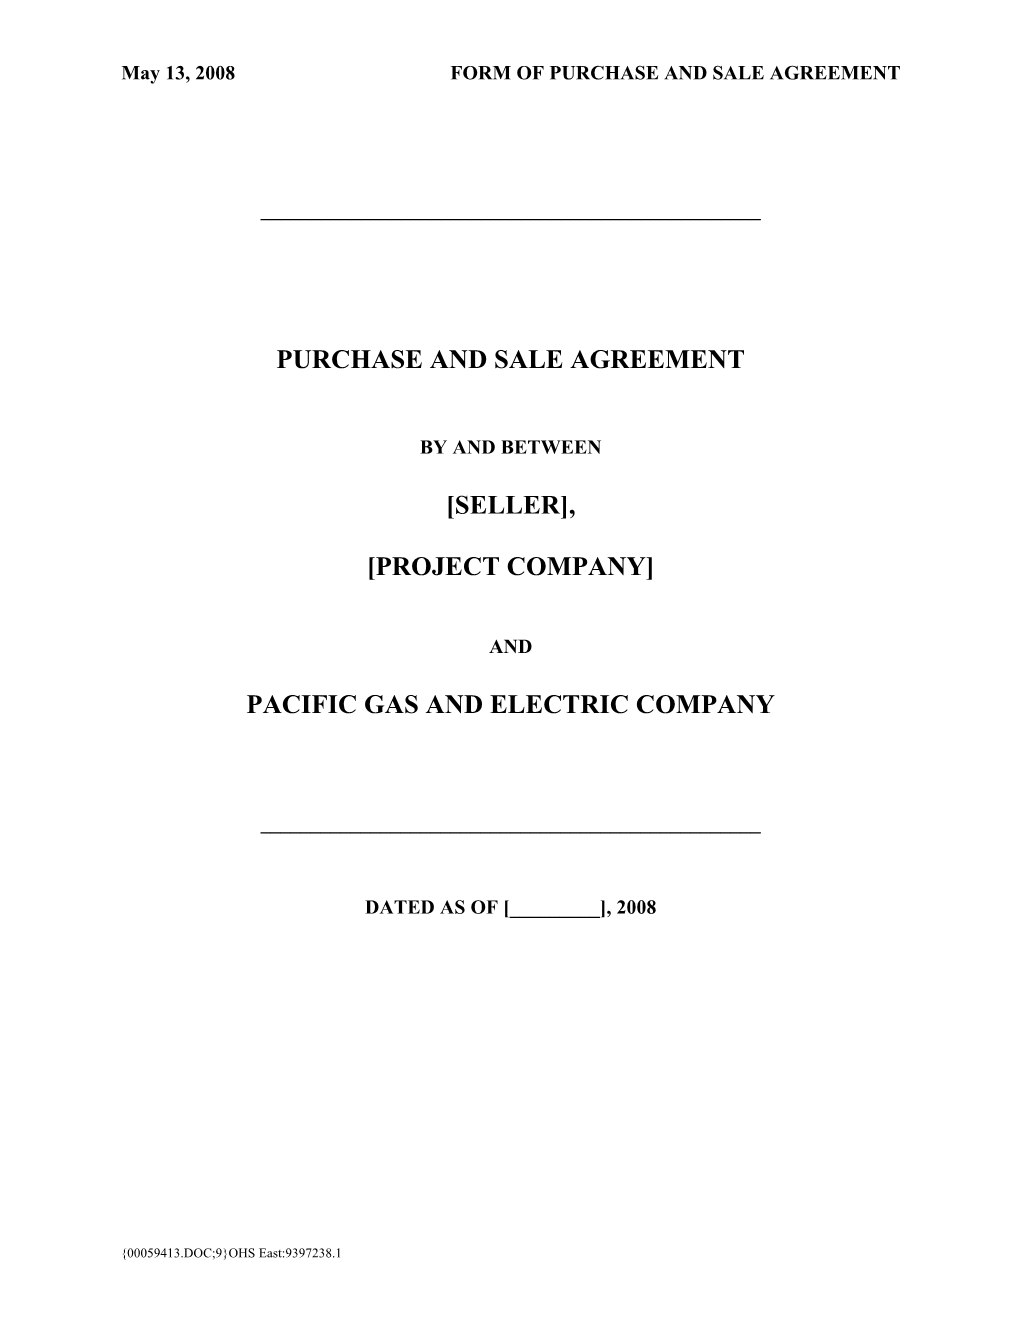 May 13, 2008 FORM of PURCHASE and SALE AGREEMENT